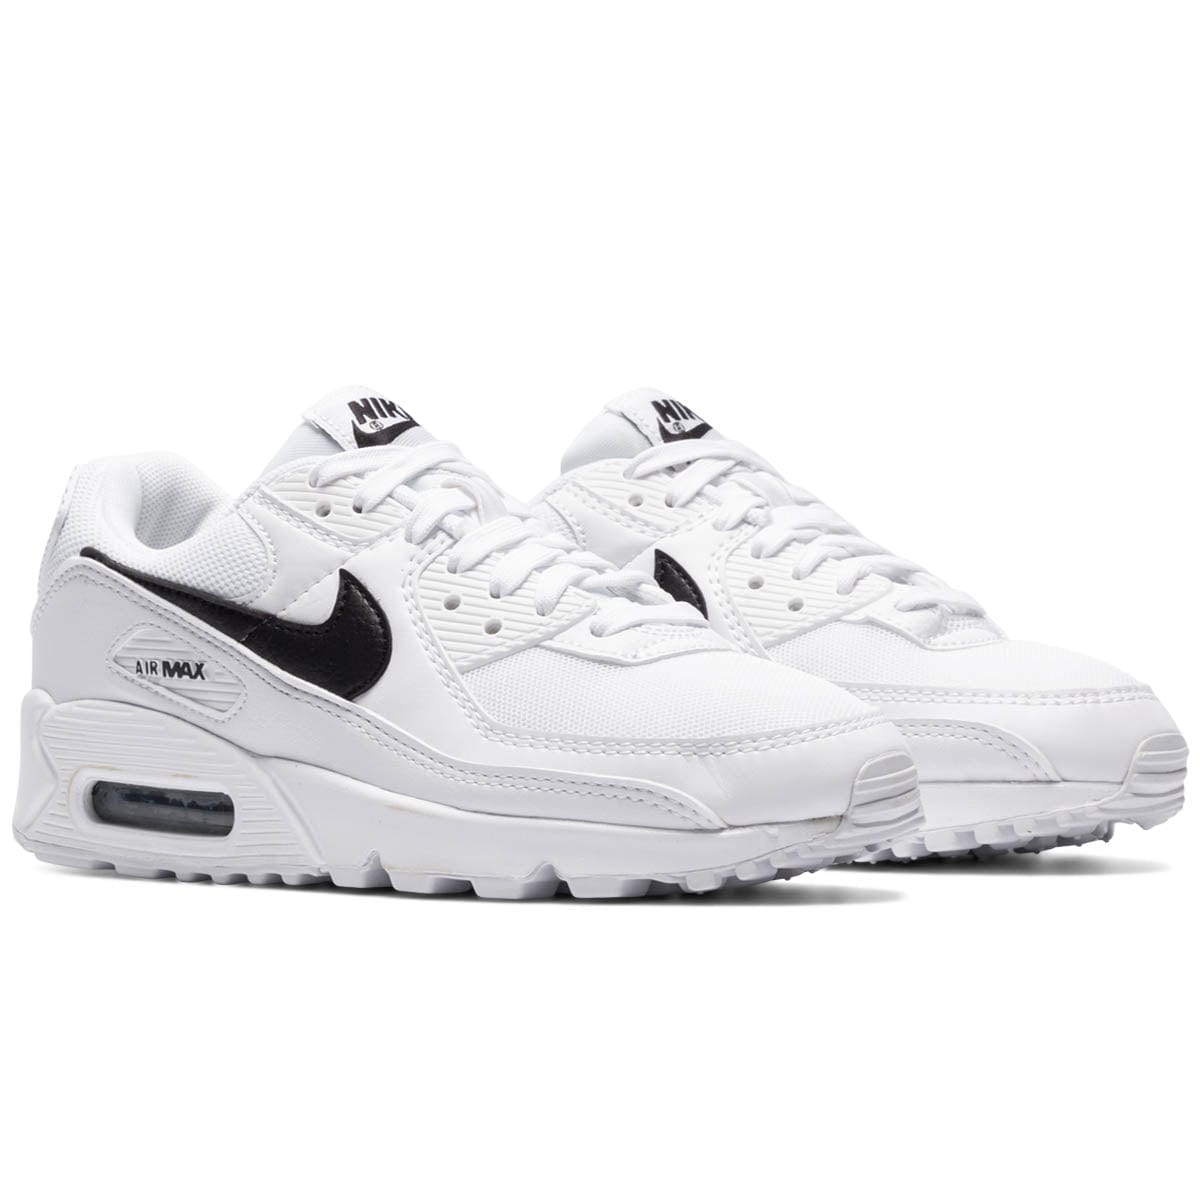 Heredero menú Ejercicio mañanero WOMEN'S AIR MAX 90 [DH8010 - nike boots by whale tank sale in michigan city  | GmarShops - 101]